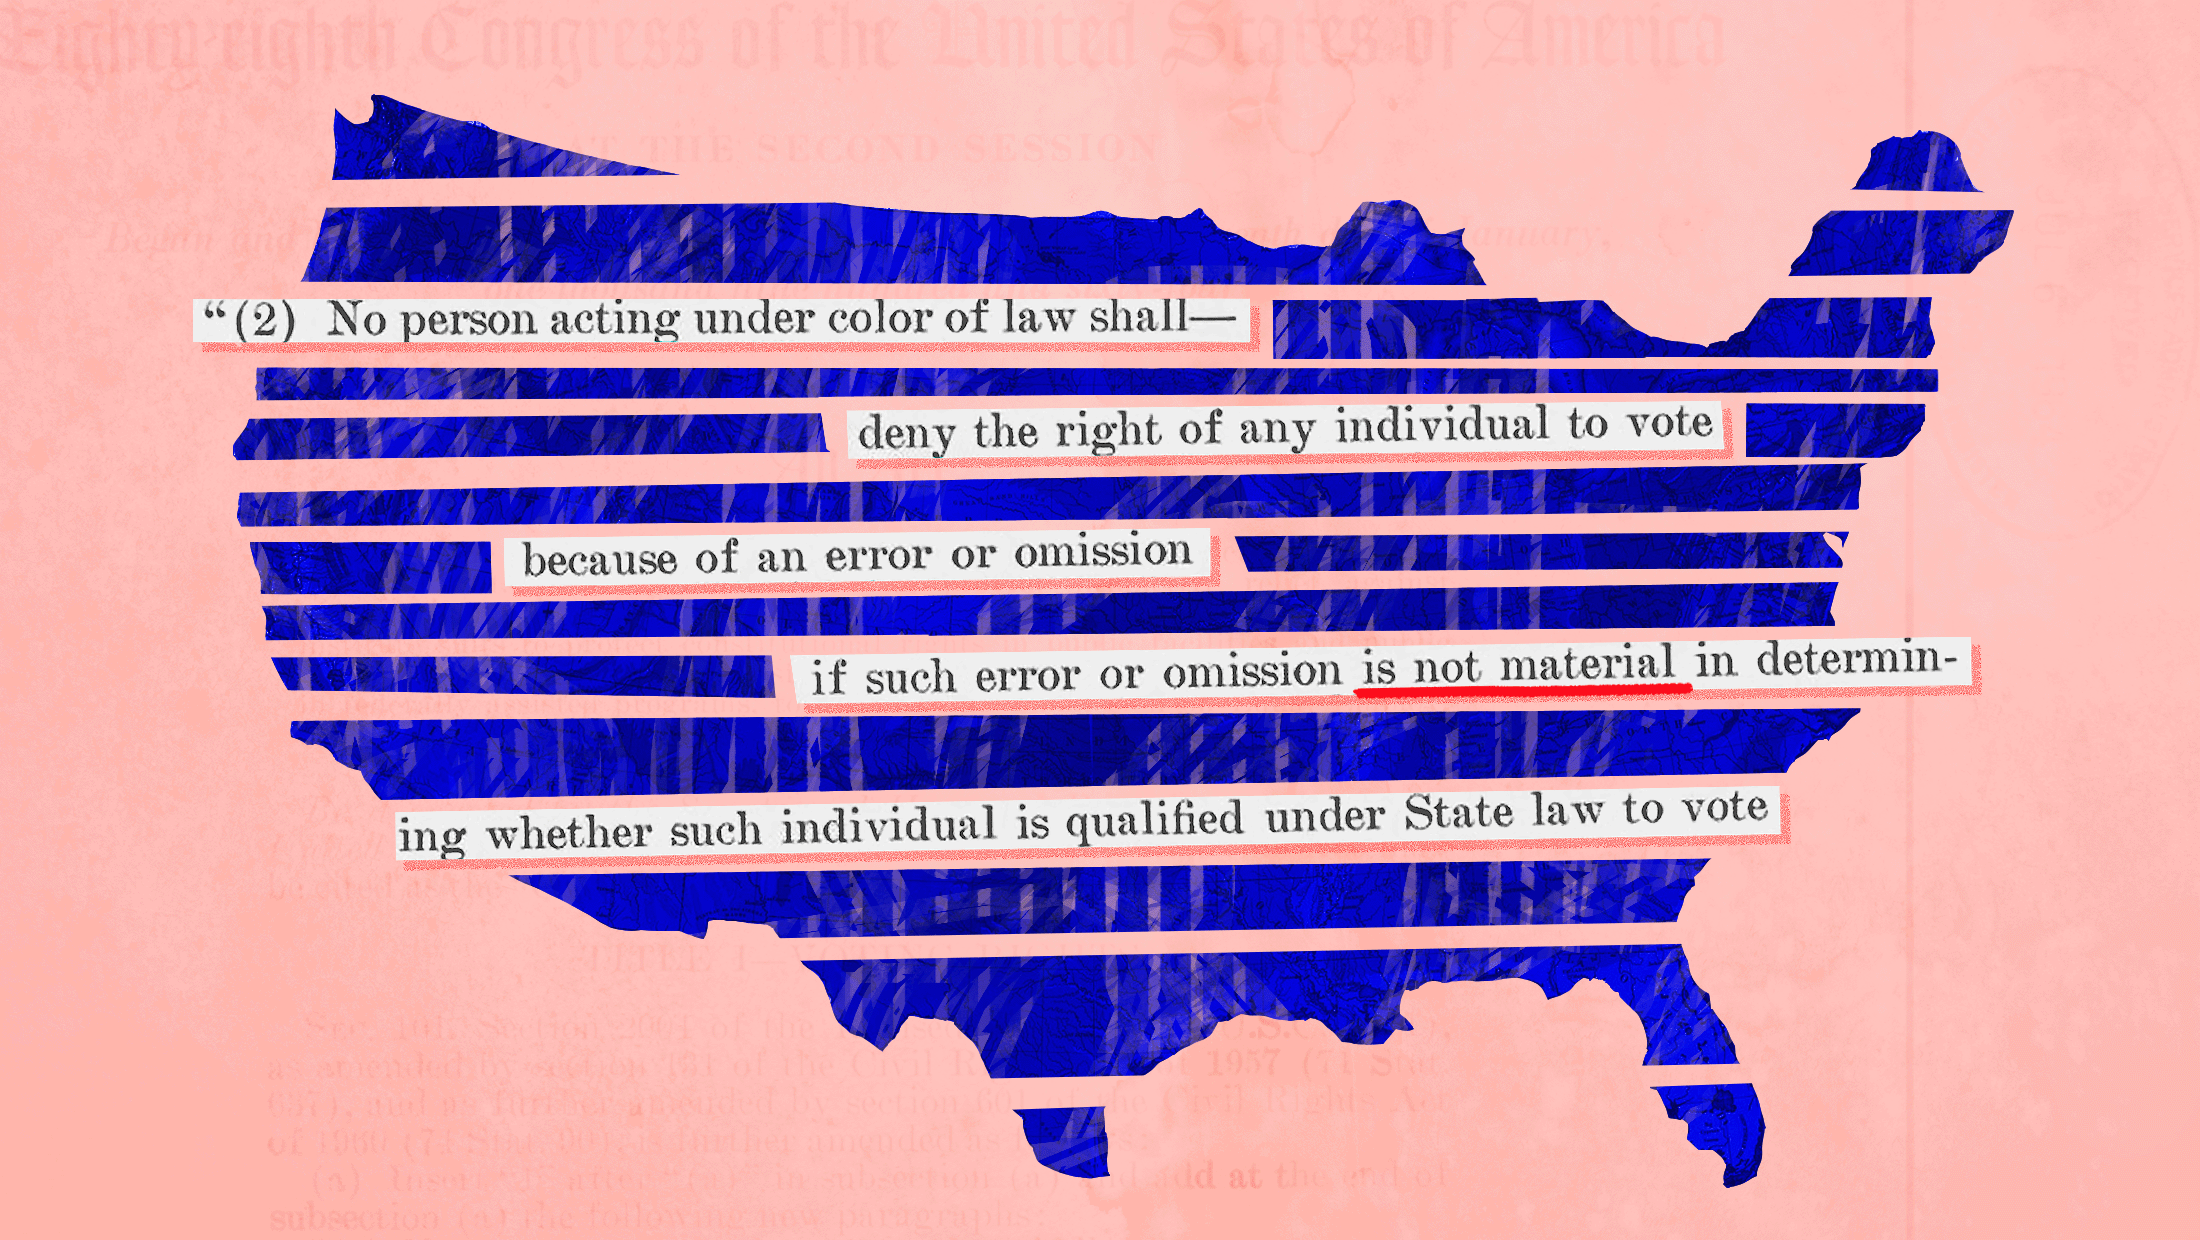 Red background with a blue cut out of the United States overlayed by text from the Materiality Provision